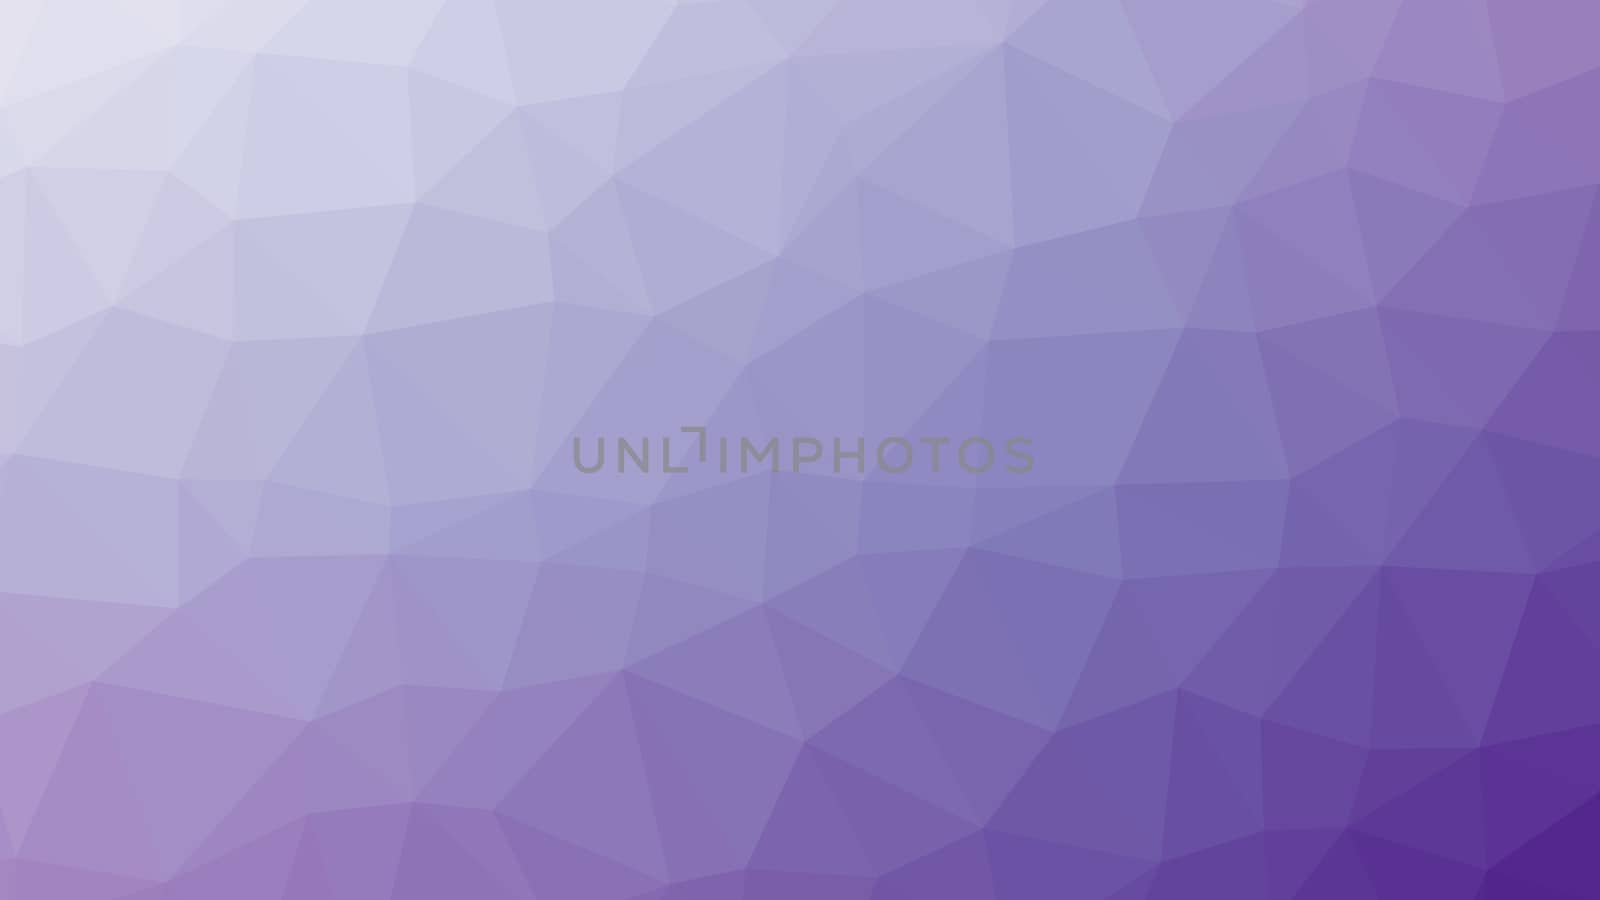 Abstract violet gradient lowploly of many triangles background for use in design by skrotov